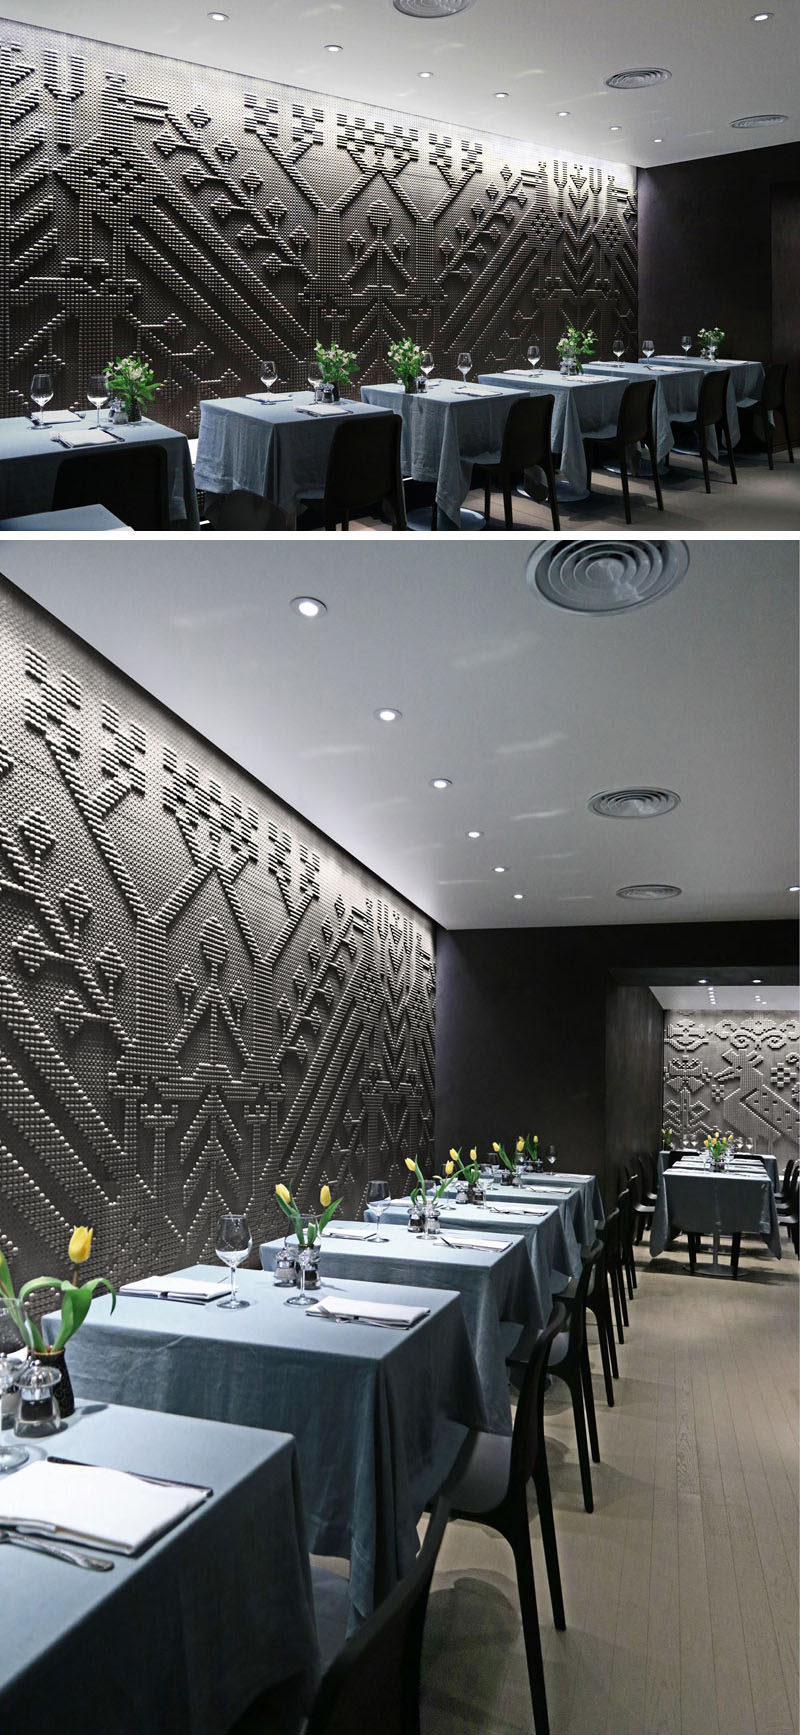 Wall Decor Ideas - Once in the main dining room of this contemporary restaurant, you're eye is immediately drawn to the the first of two large wall tapestries made from finely chiseled natural stone.